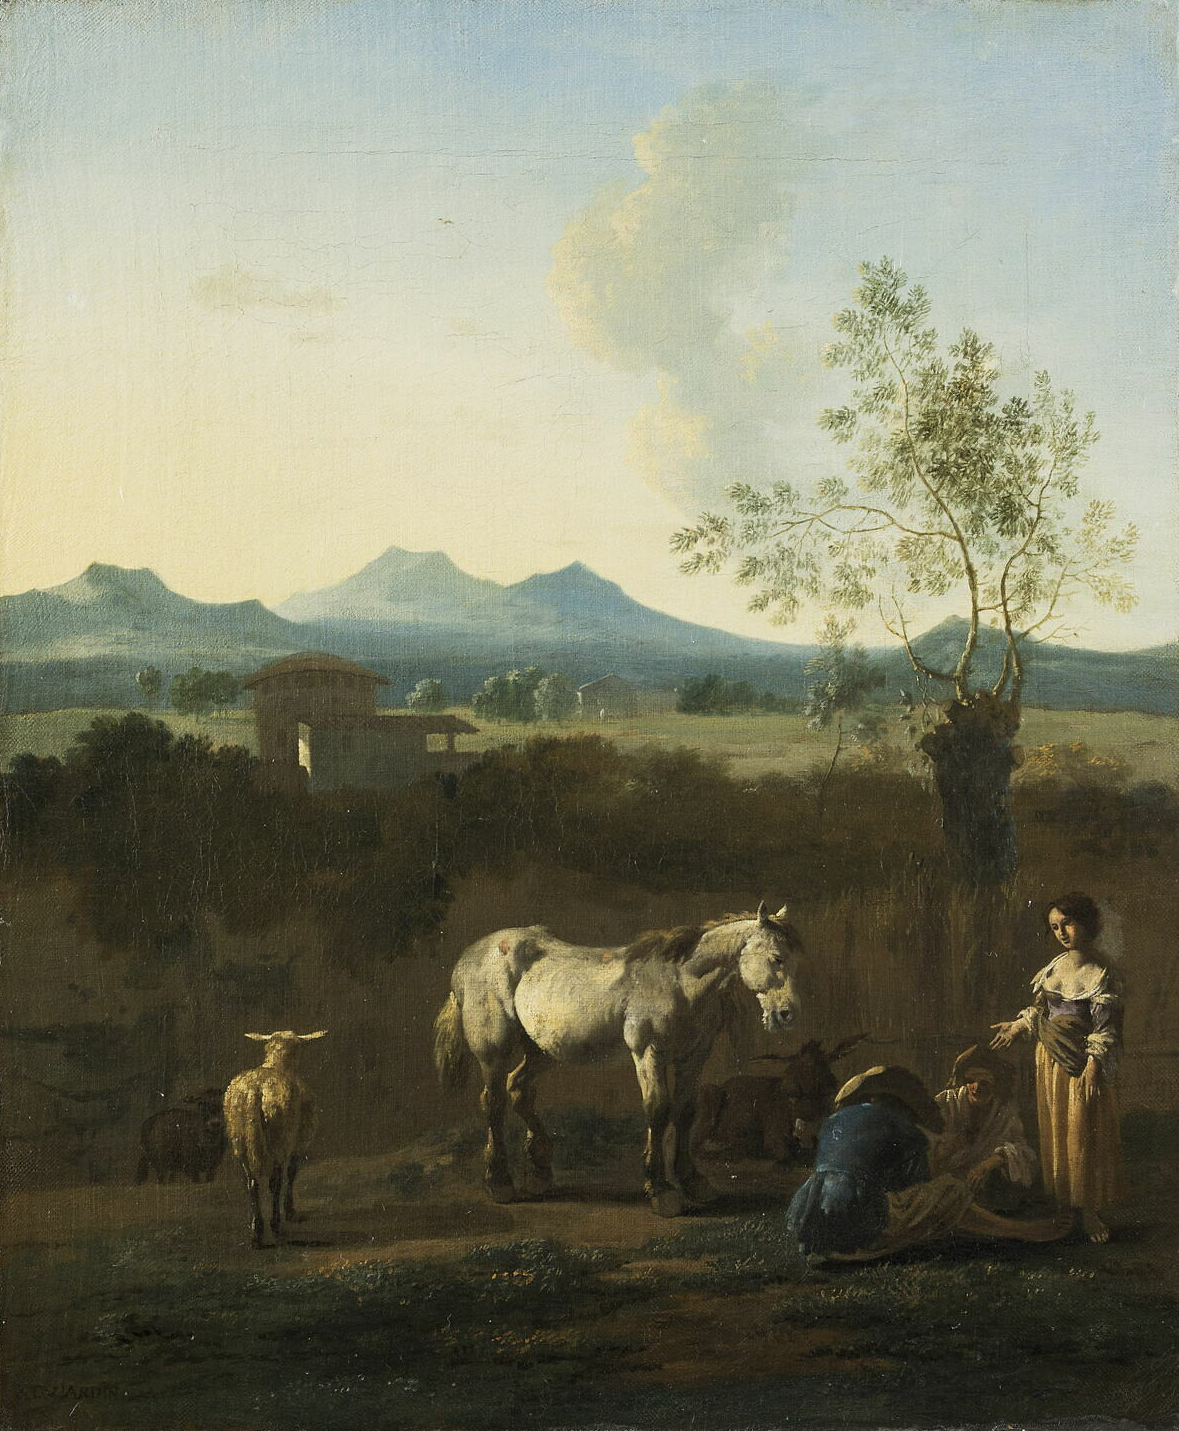 A painting depicting a white horse and a lamb standing near a group of people and cattle. One woman stands while the other two sit on the ground. Behind them is a tree with thin branches and green leaves. In the background, there is a house along a large grass field. This is shadowed by the vast gray mountain range in the background. The sky is clear with only a few large clouds.